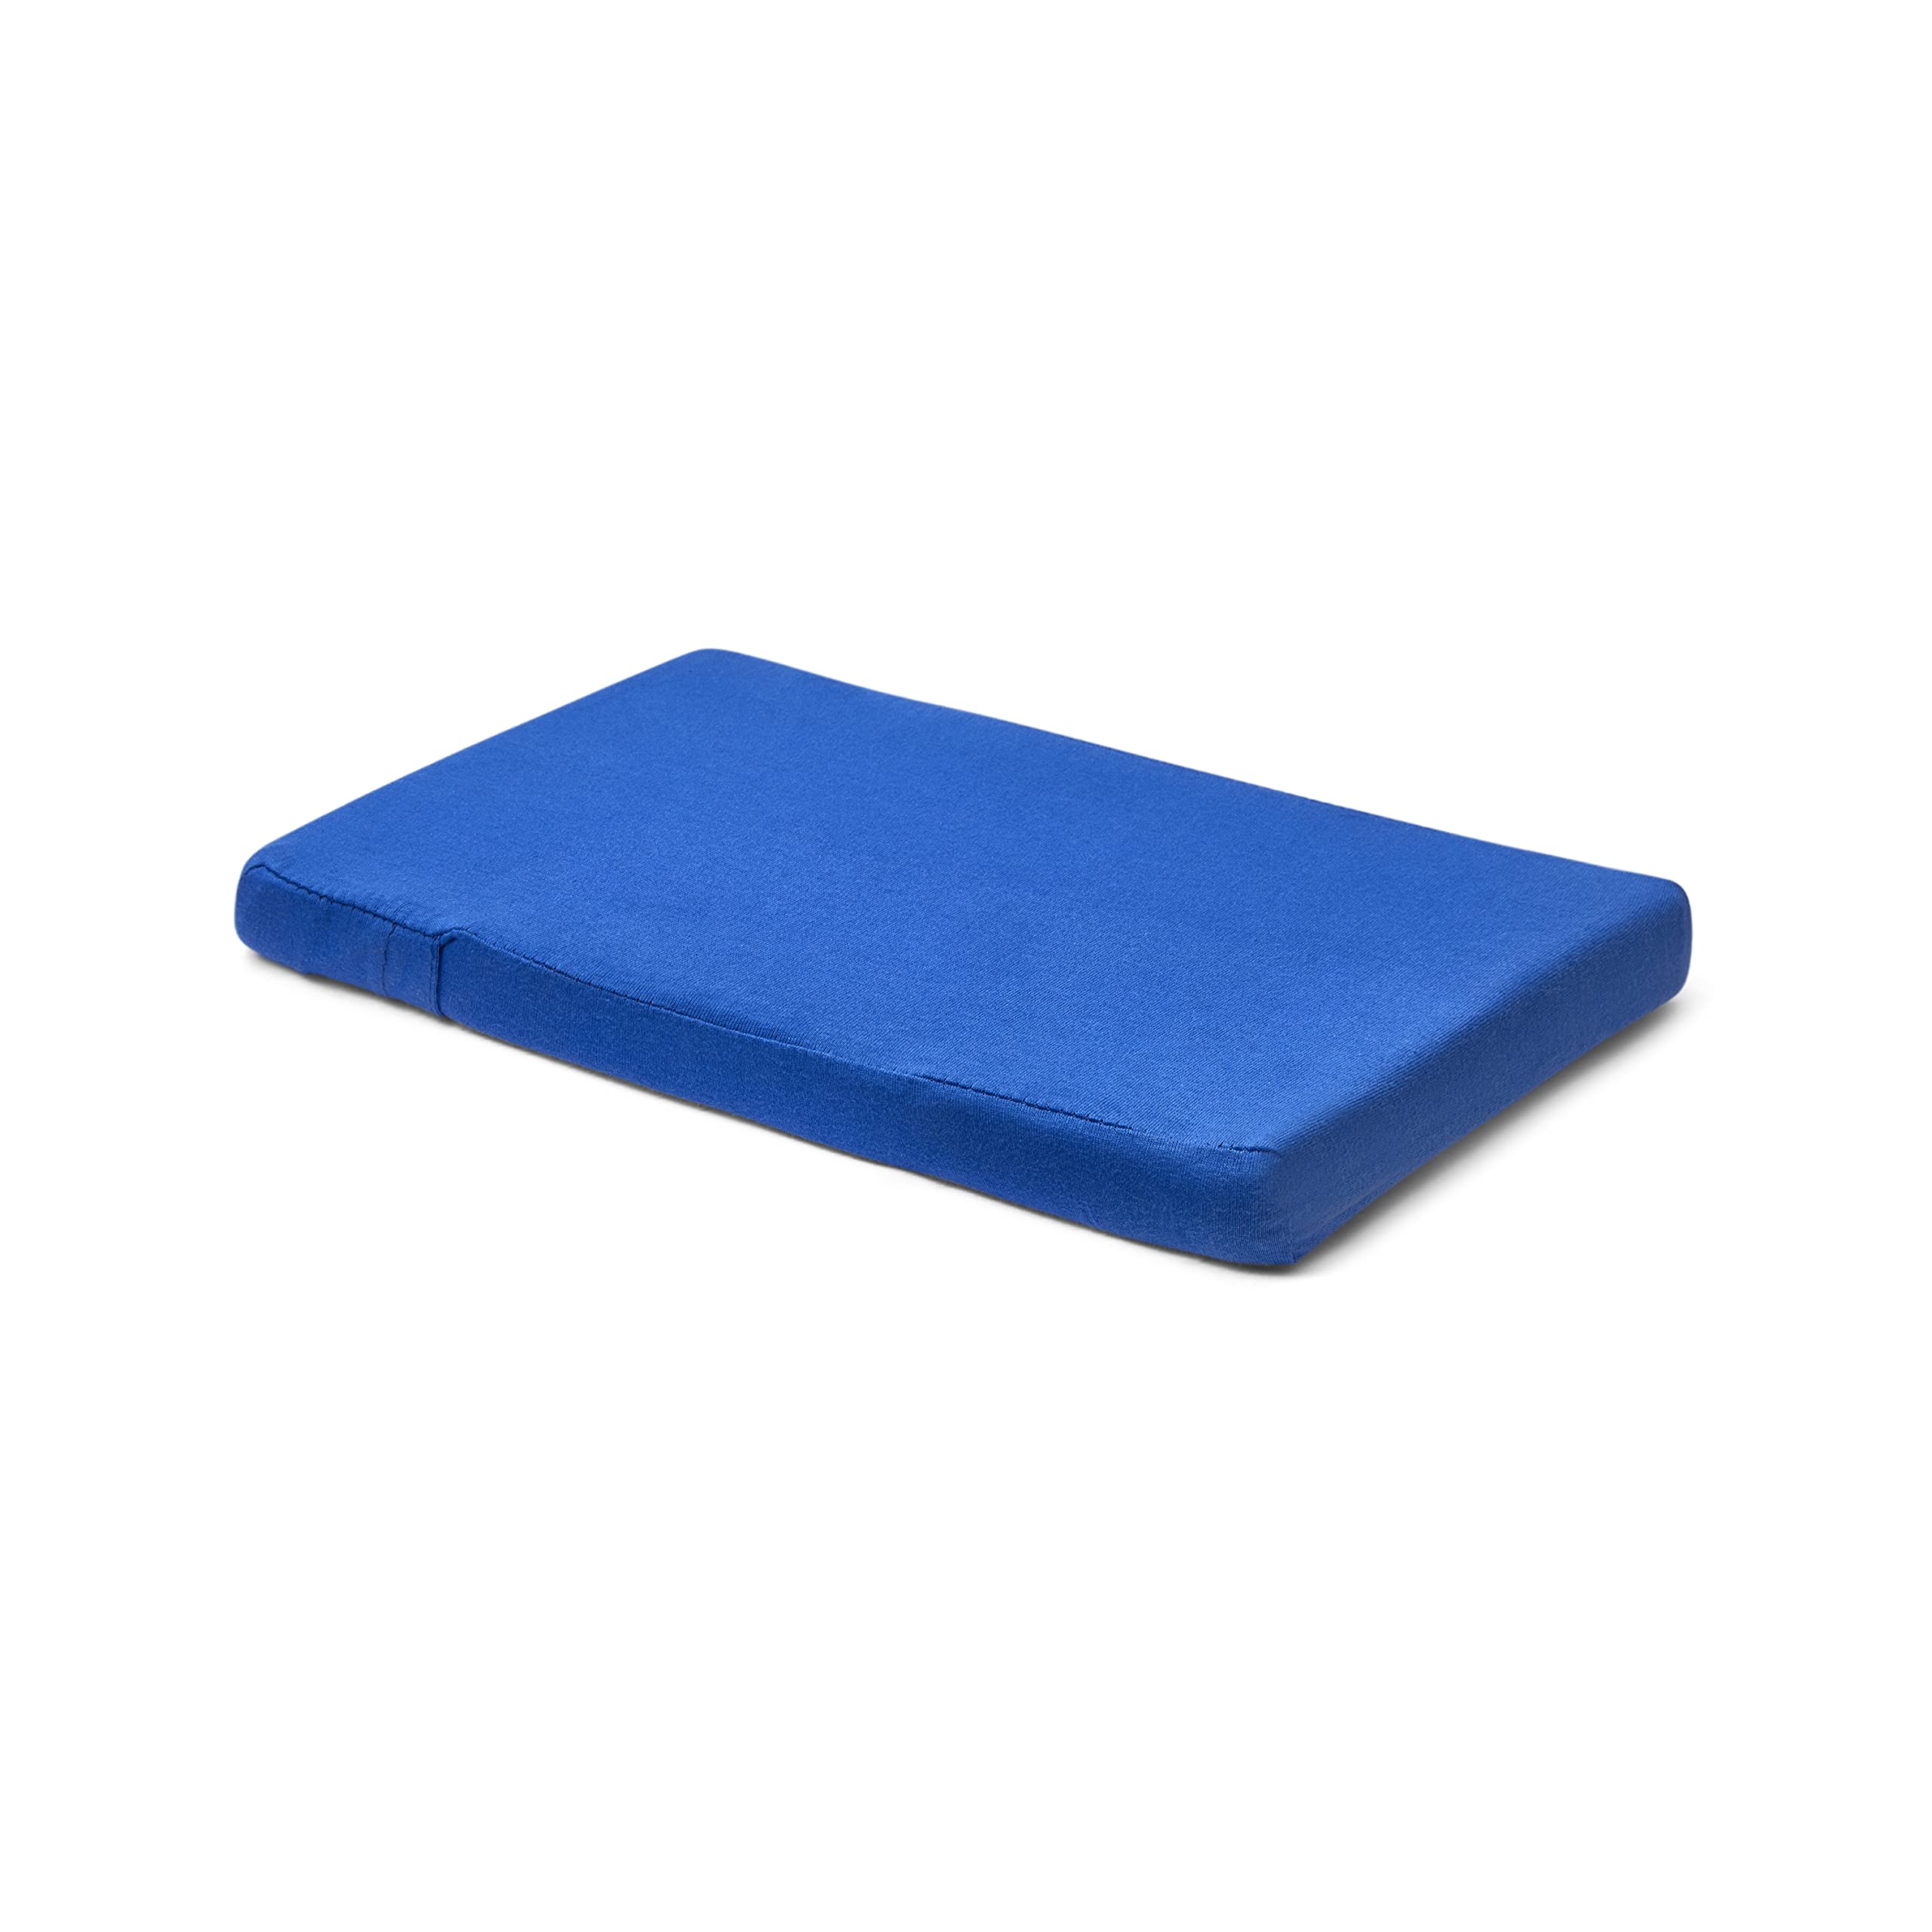 1 Inch Head Pad with Blue Cover